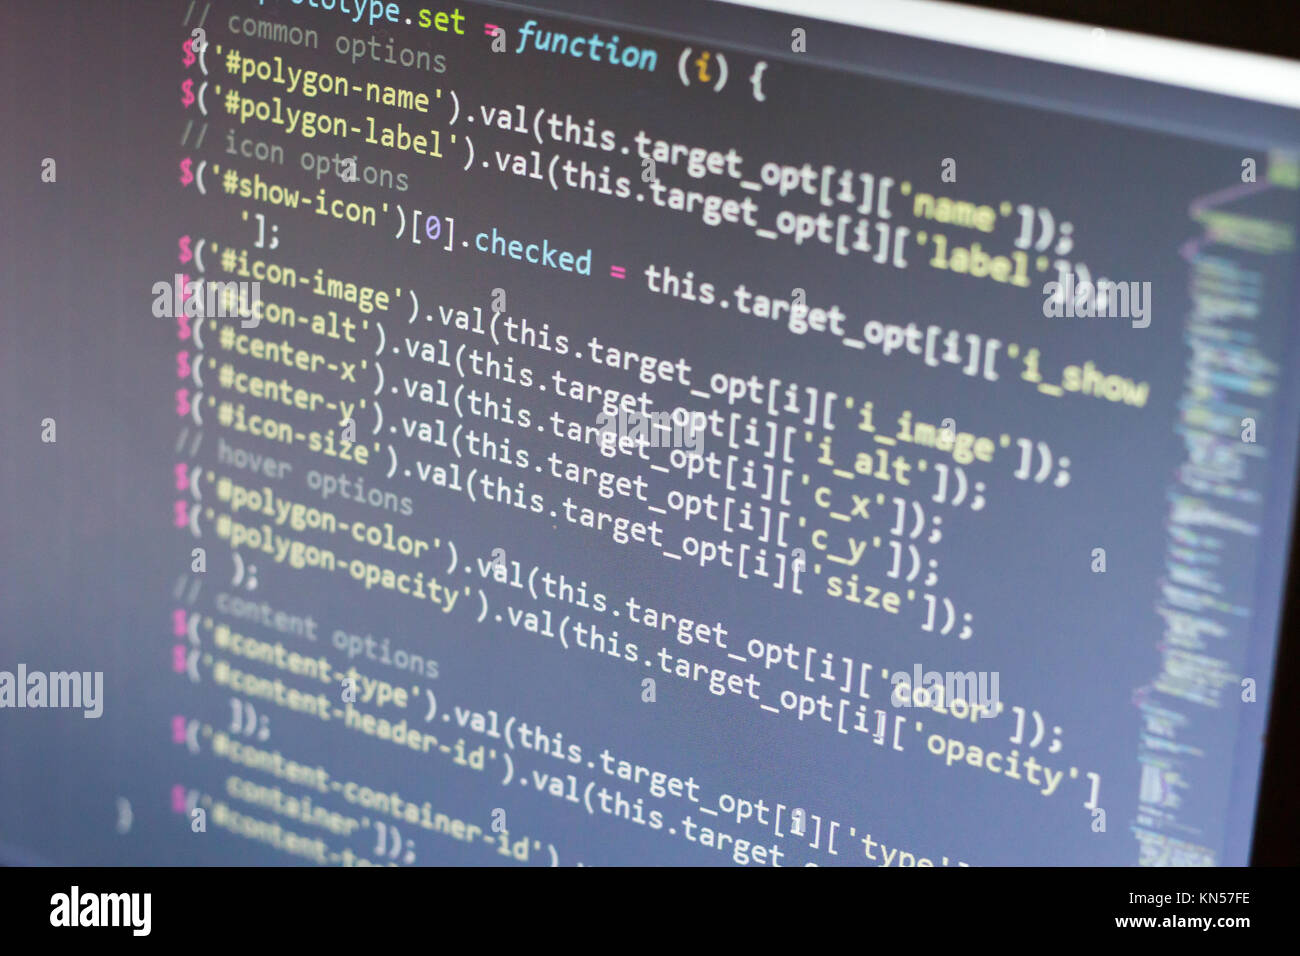 Desktop Source Code And Wallpaper By Computer Language With Coding And  Programming Stock Photo - Download Image Now - iStock